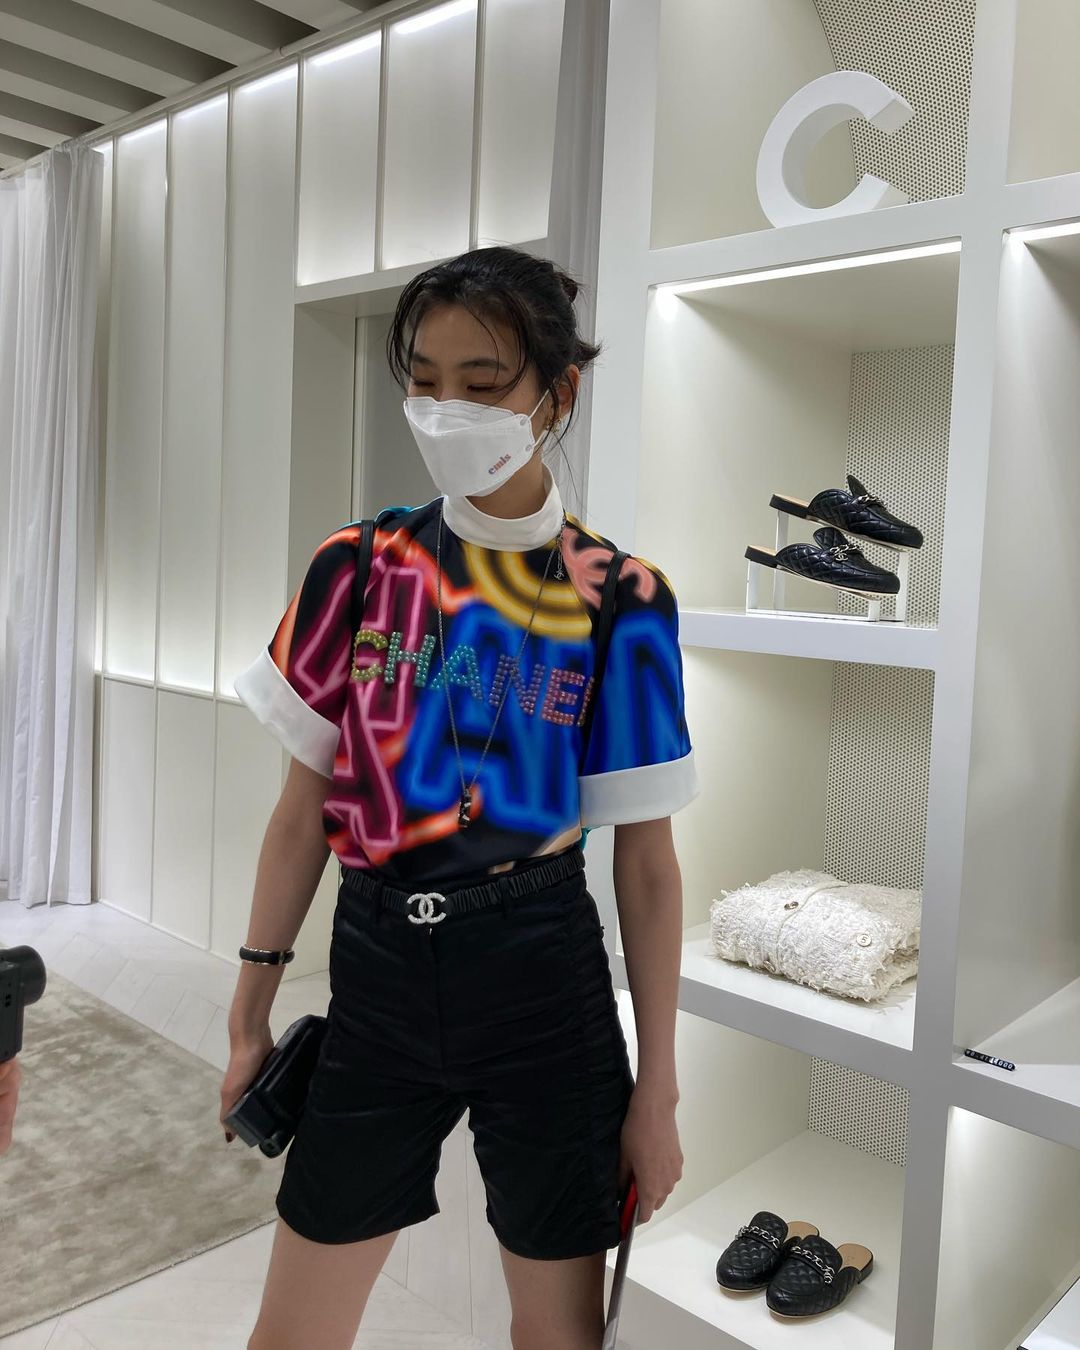 Squid Game' Star Hoyeon Jung Takes Paris in Jeans and Comfy Clogs